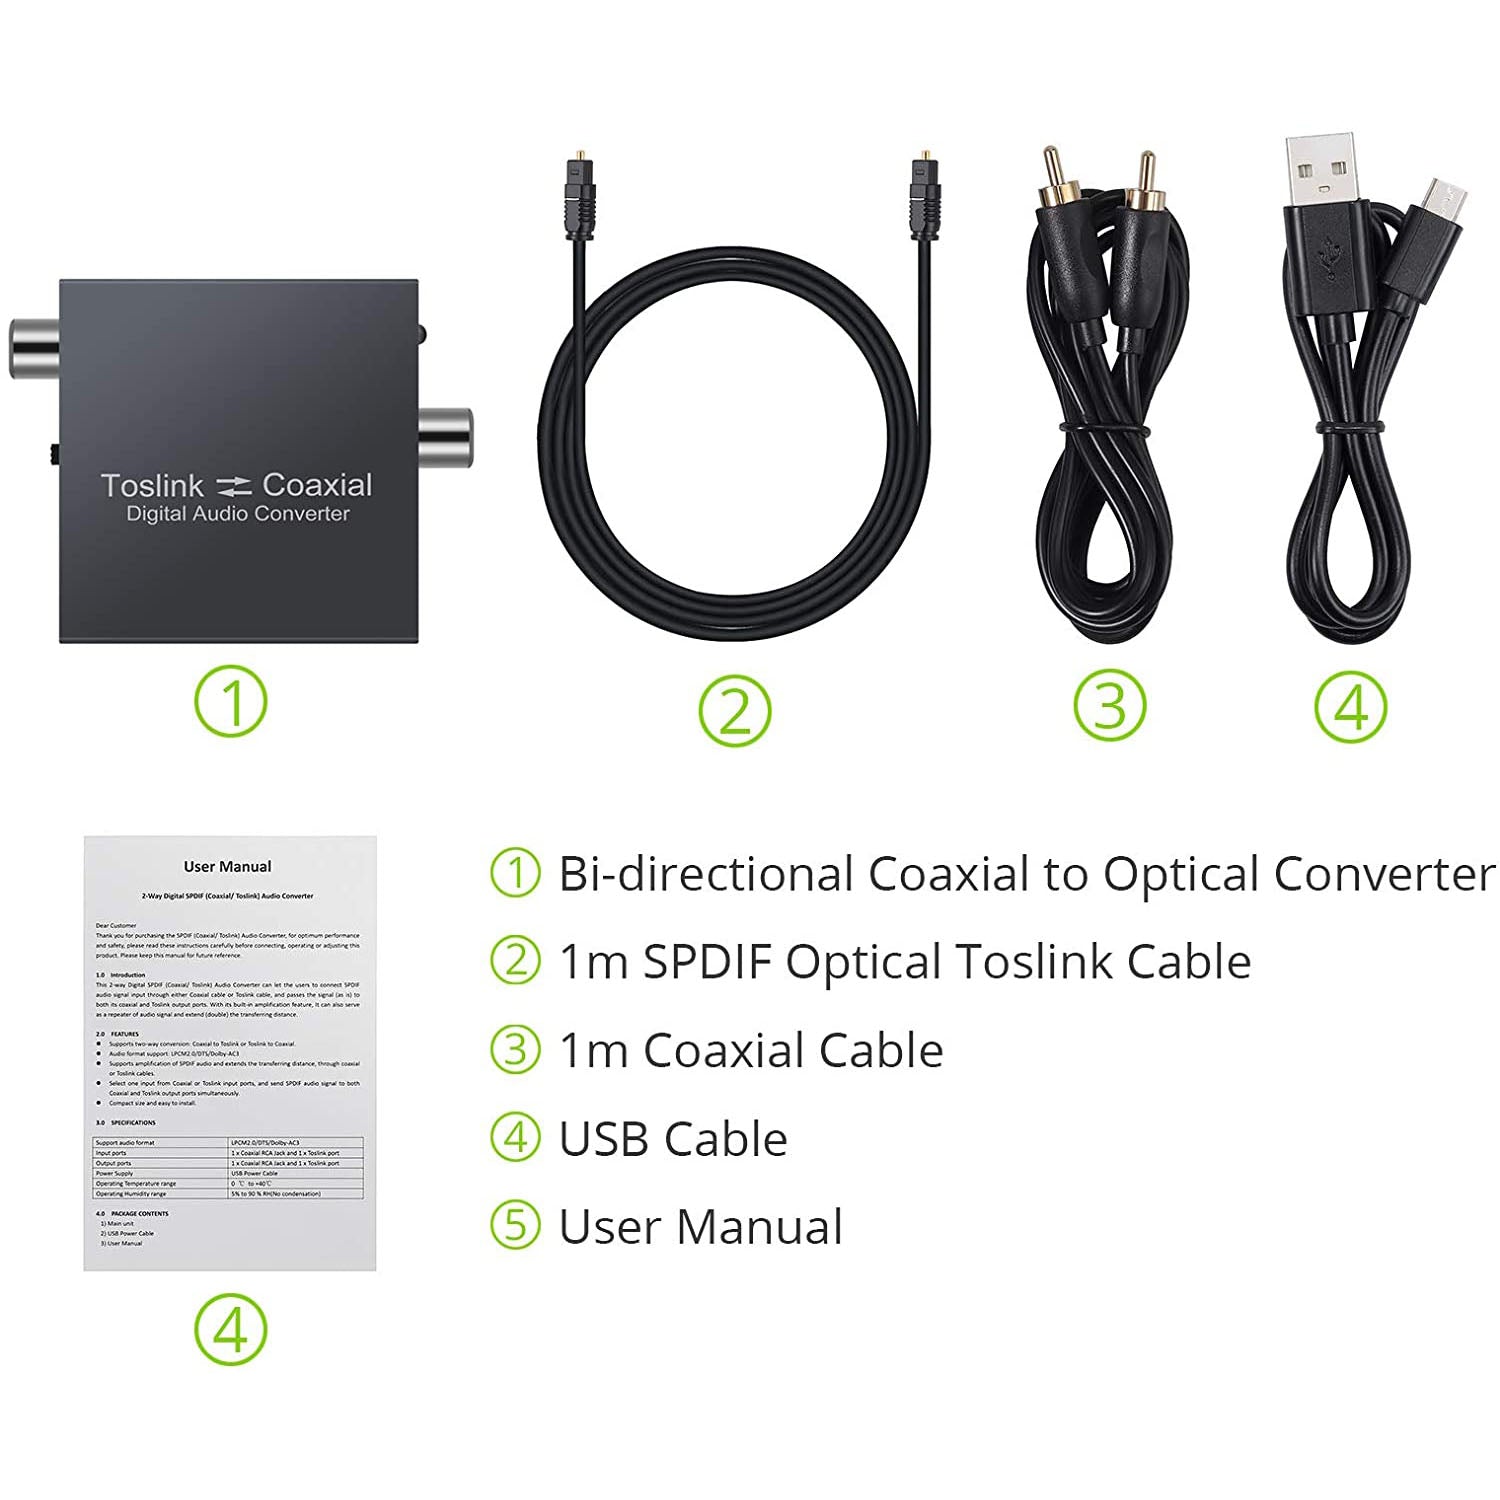 LiNKFOR Bi-Directional Toslink and Coaxial Converter